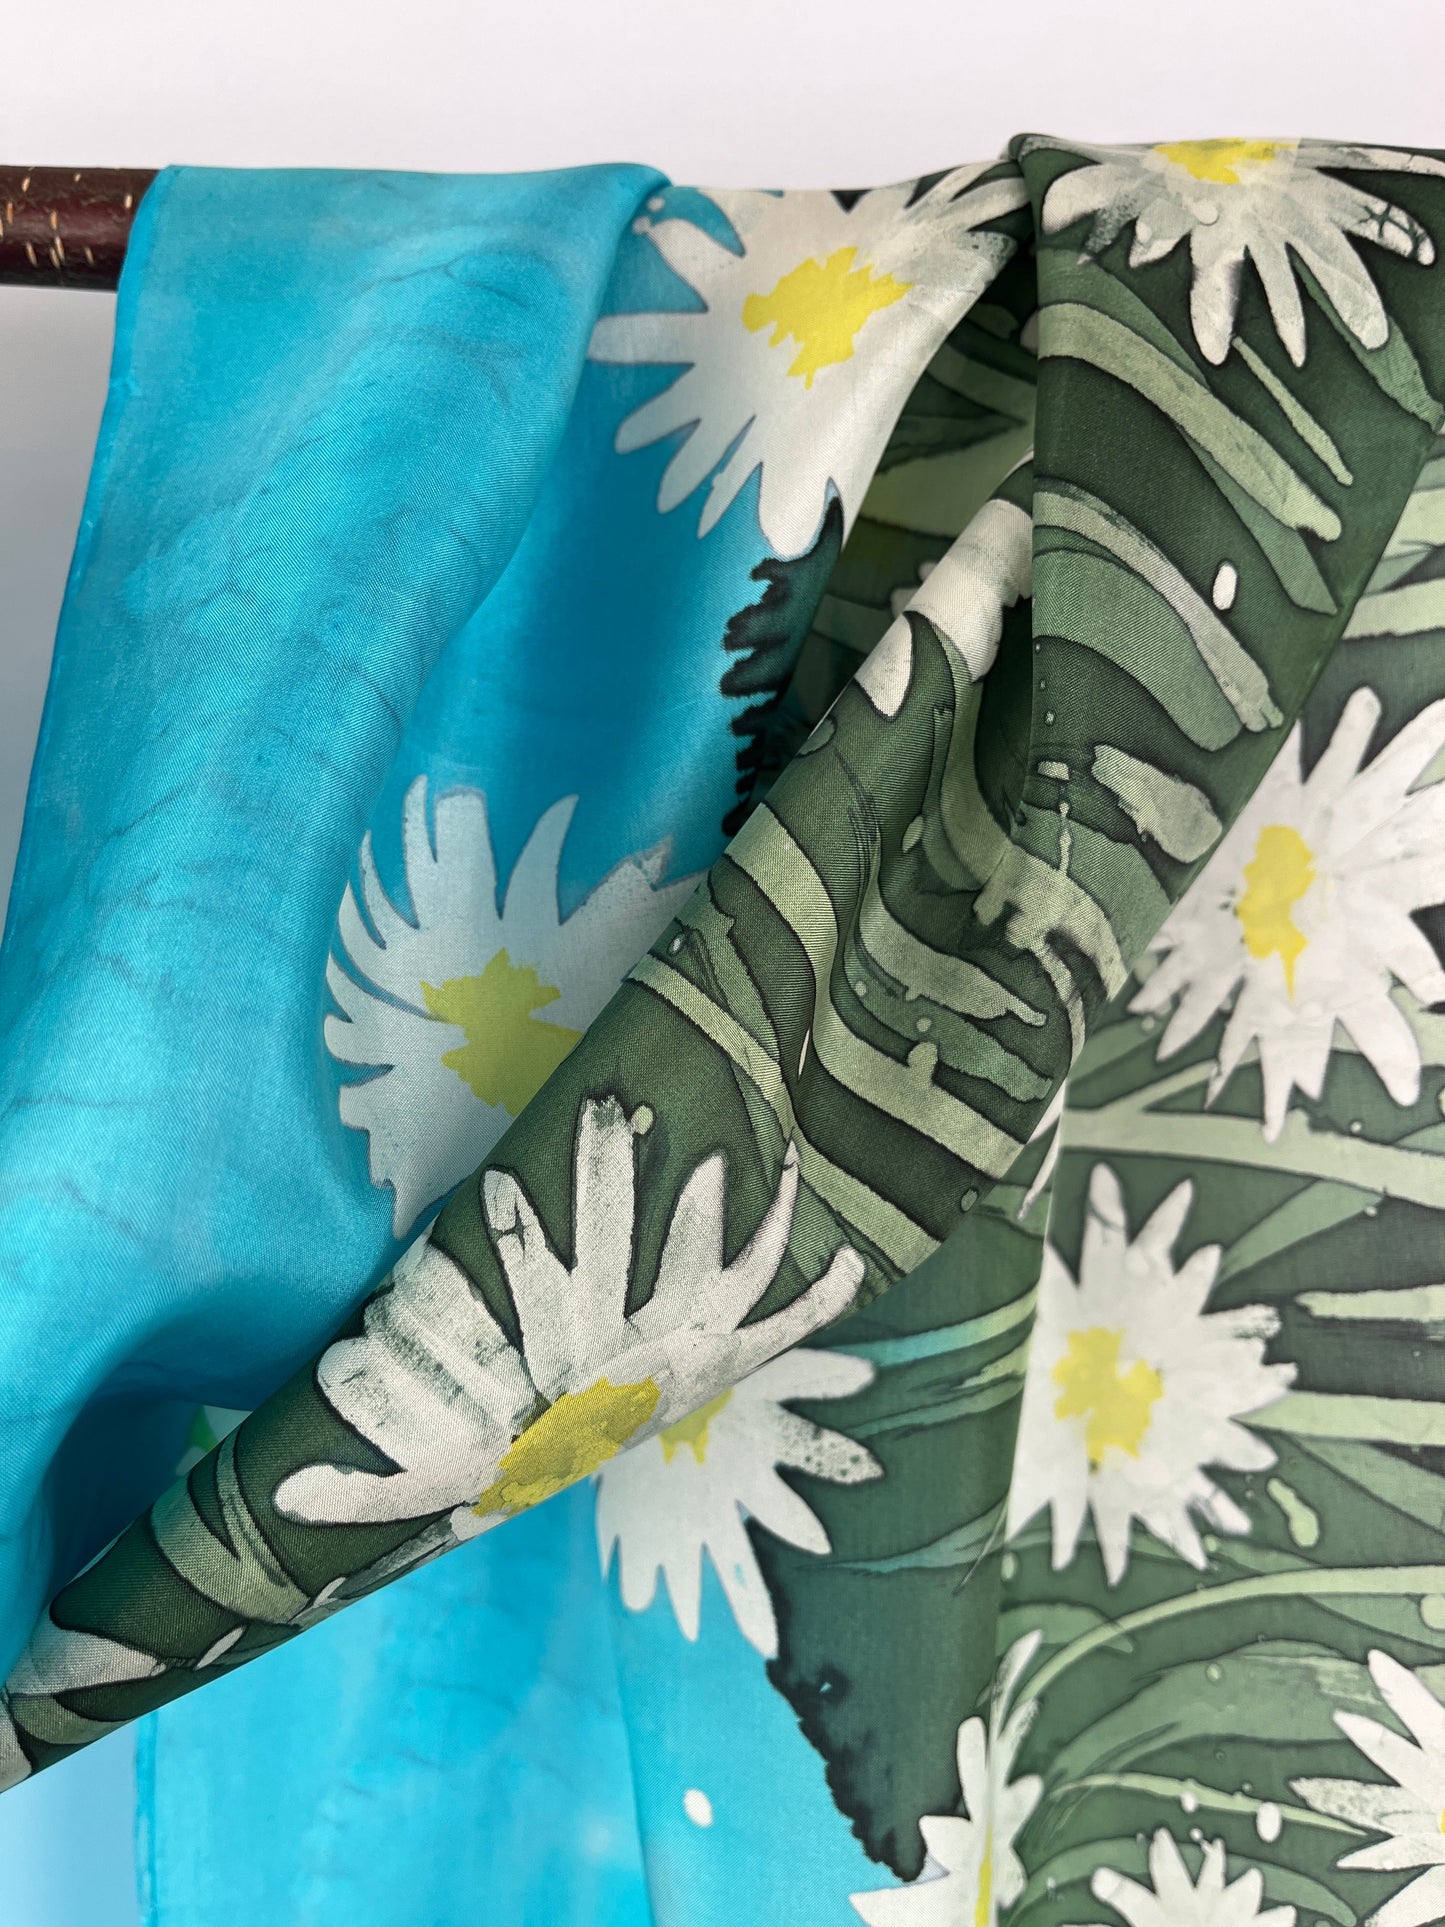 “Field of Daisies” - Hand-dyed Silk Scarf - $135